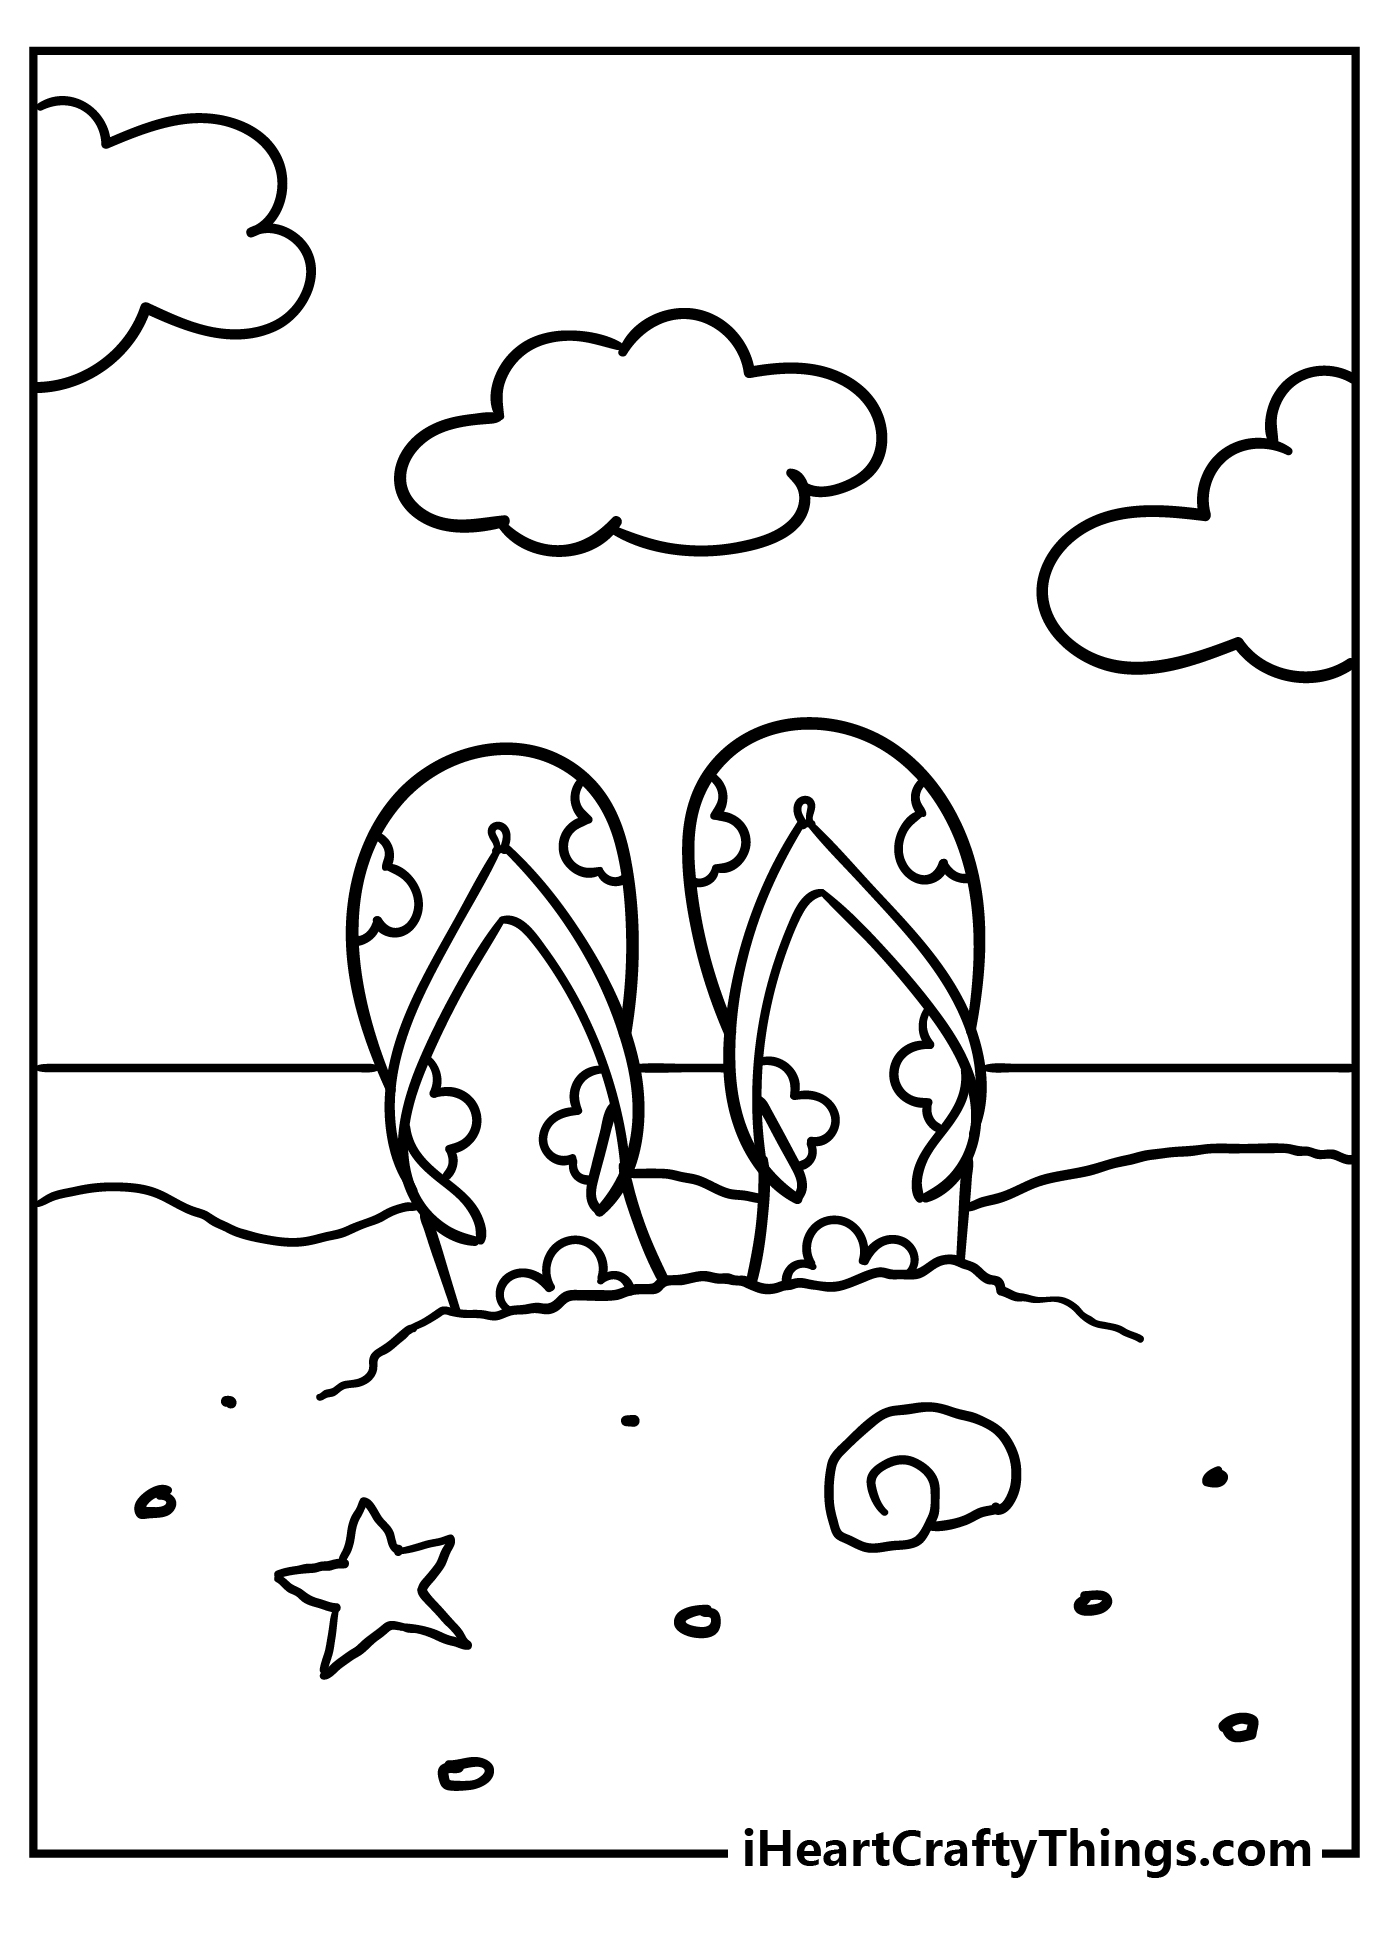 Tropical Coloring Pages for kids free download